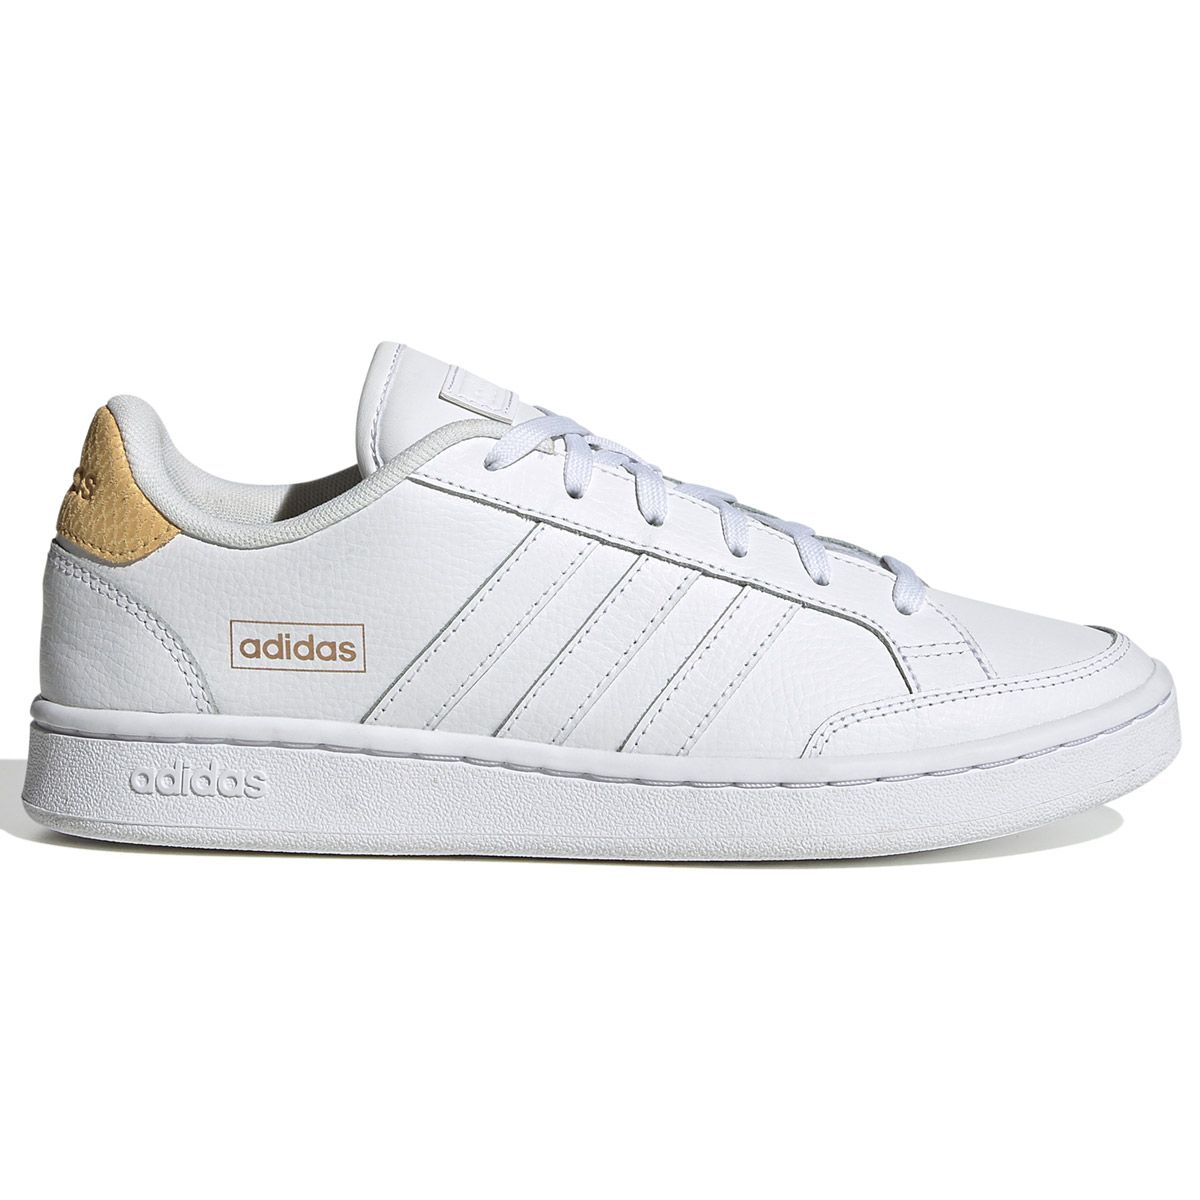 adidas Grand Court sneakers